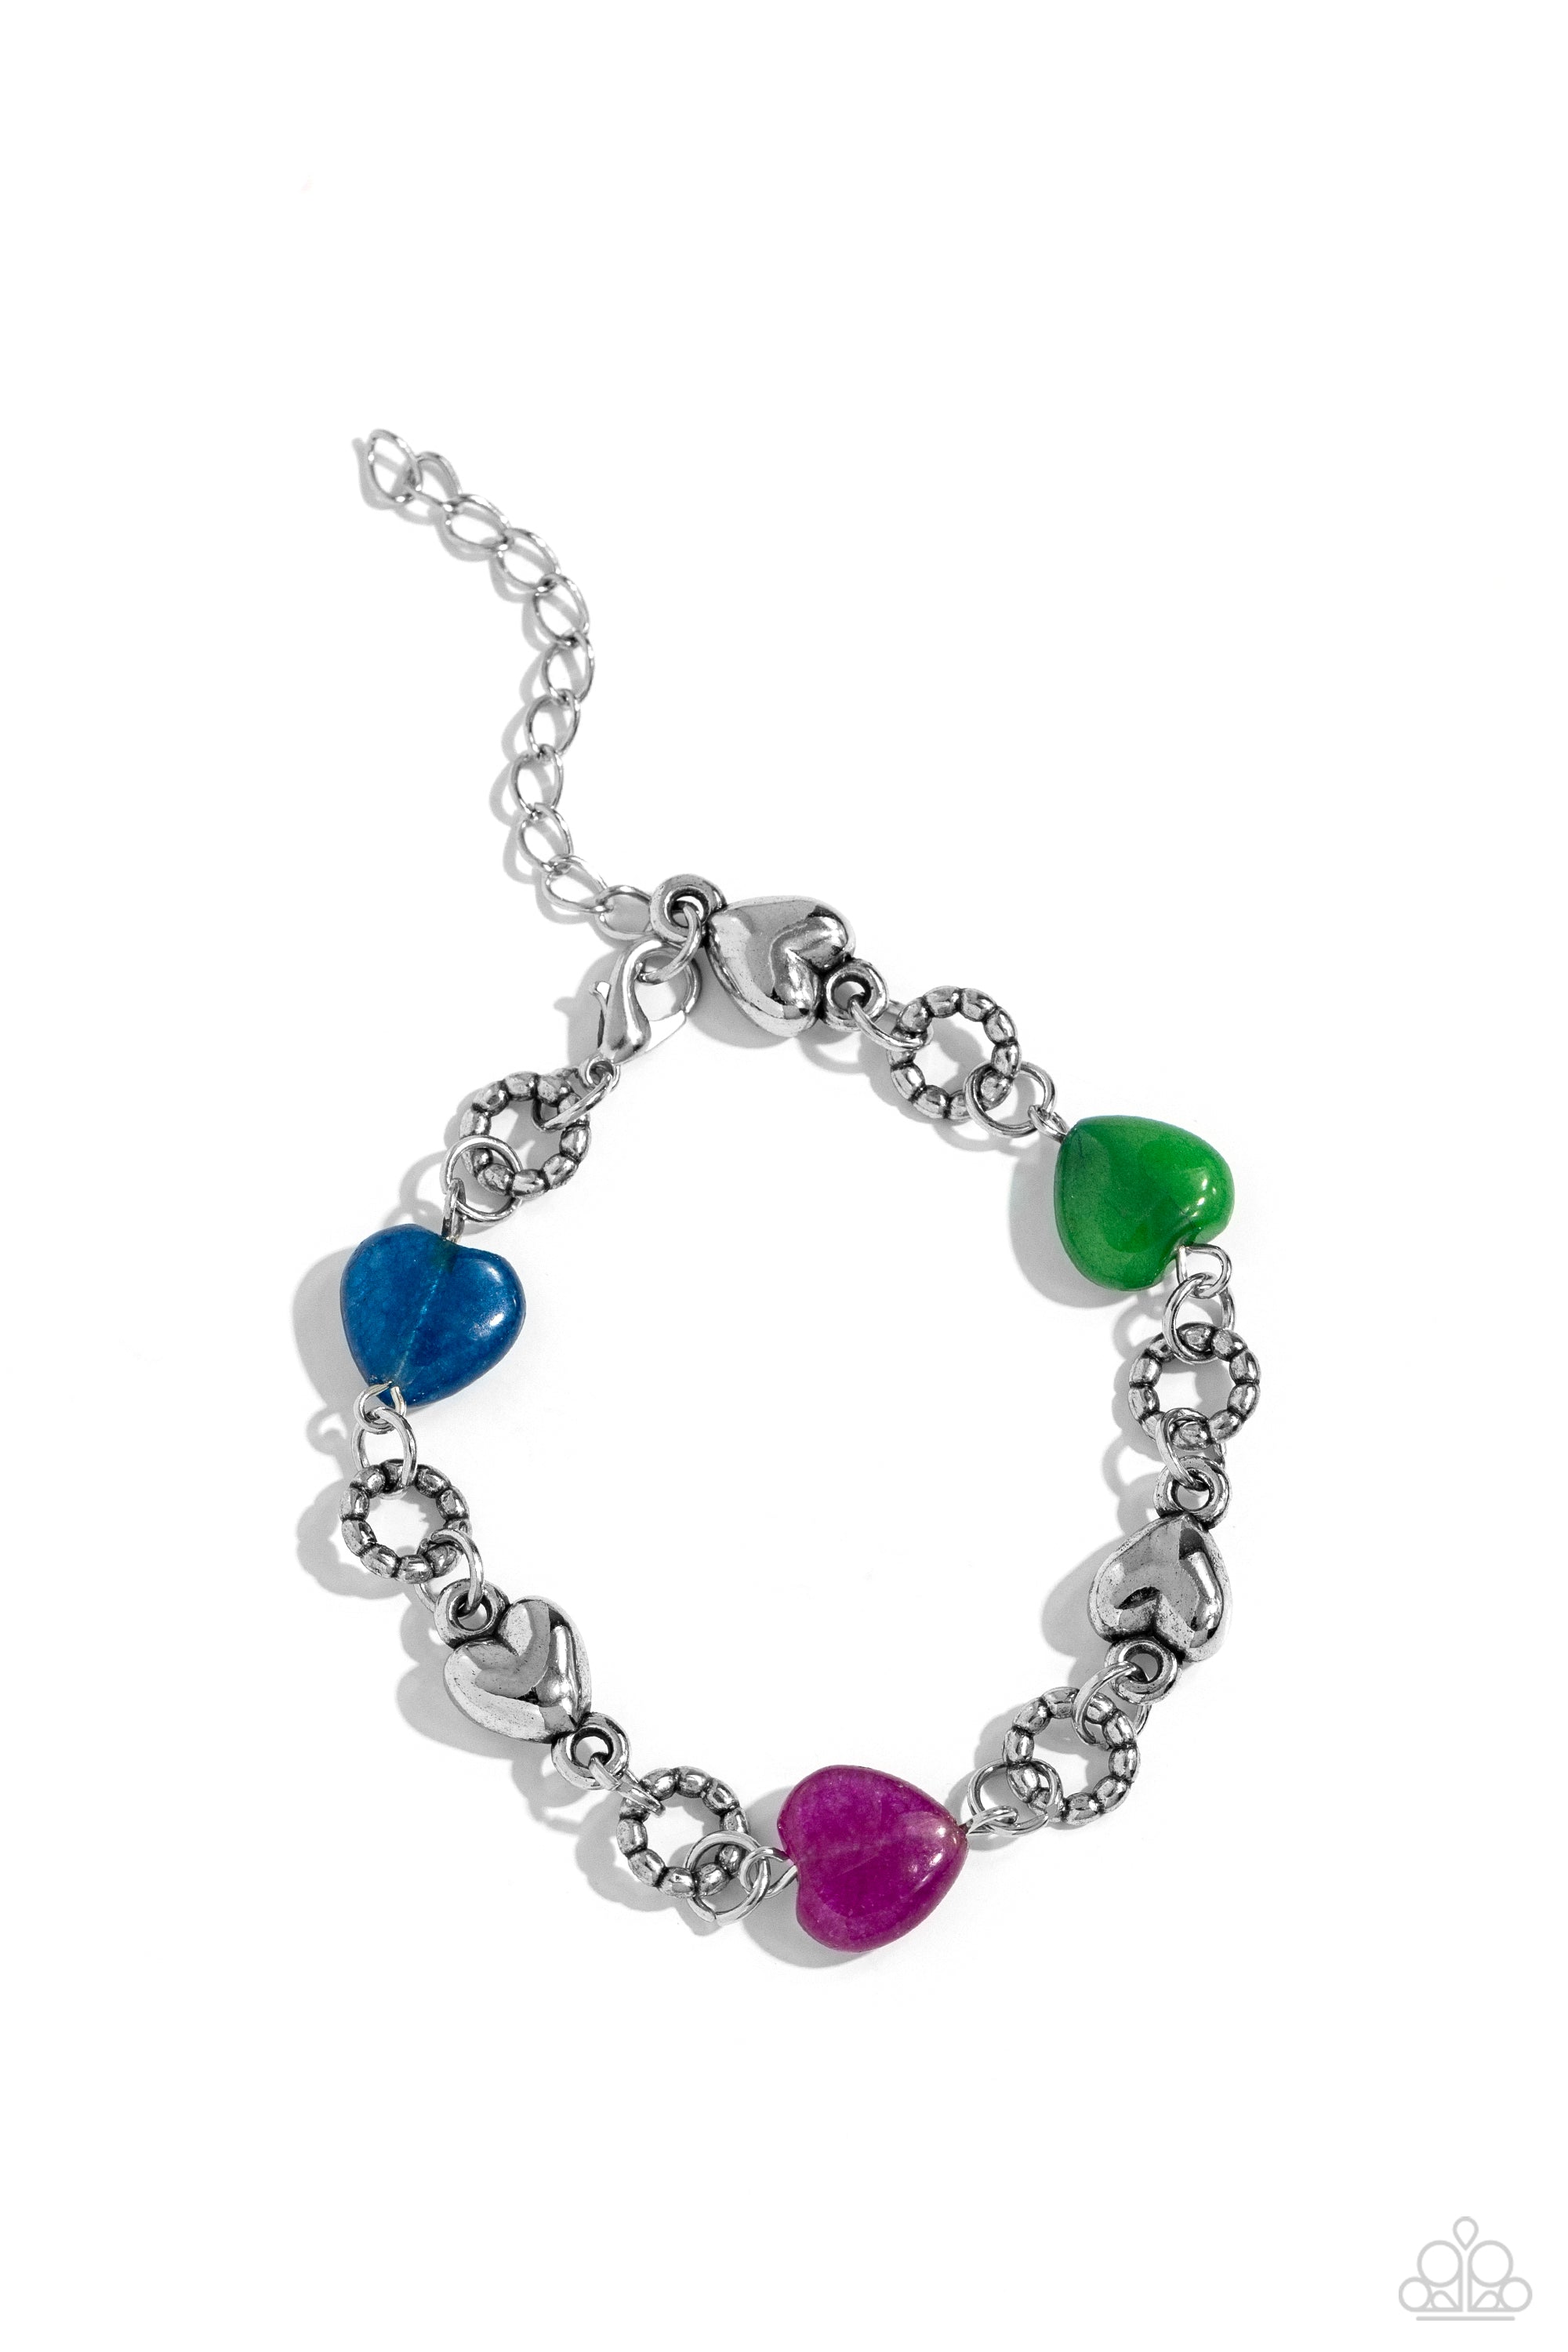 I Can Feel Your Heartbeat Multi Stone & Silver Bracelet - Paparazzi Accessories- lightbox - CarasShop.com - $5 Jewelry by Cara Jewels